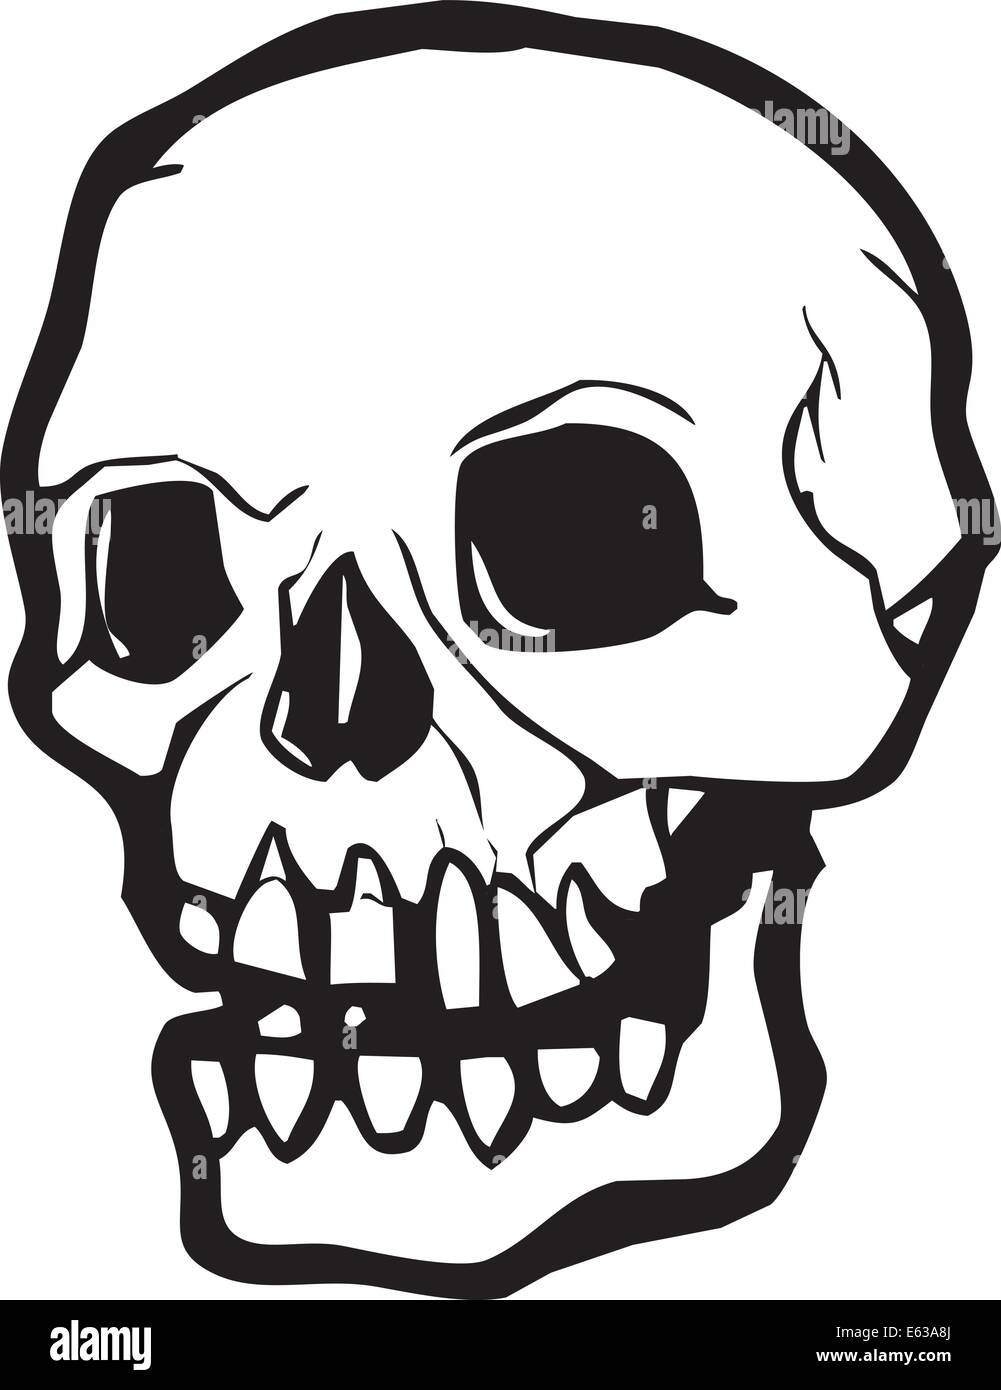 Human Skull in simple vector style in black and white Stock Vector